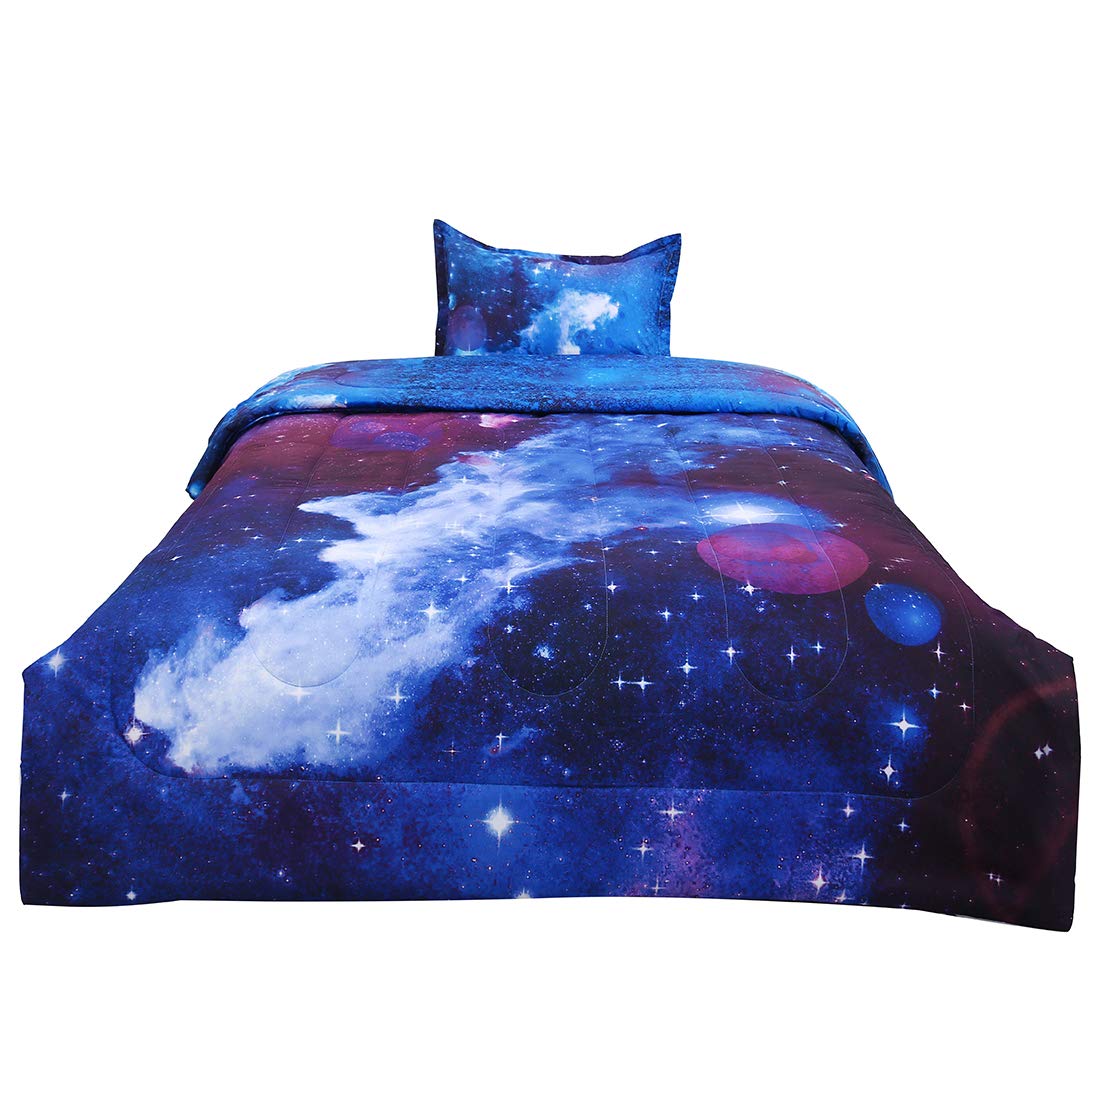 Book Cover uxcell Twin Comforter Set Galaxy Dark Blue for Twin Bed - 3D Outer Space Themed Bedding - All-Season Down Alternative Quilted Duvet Reversible Design - Includes 1 Comforter, 1 Pillow Case